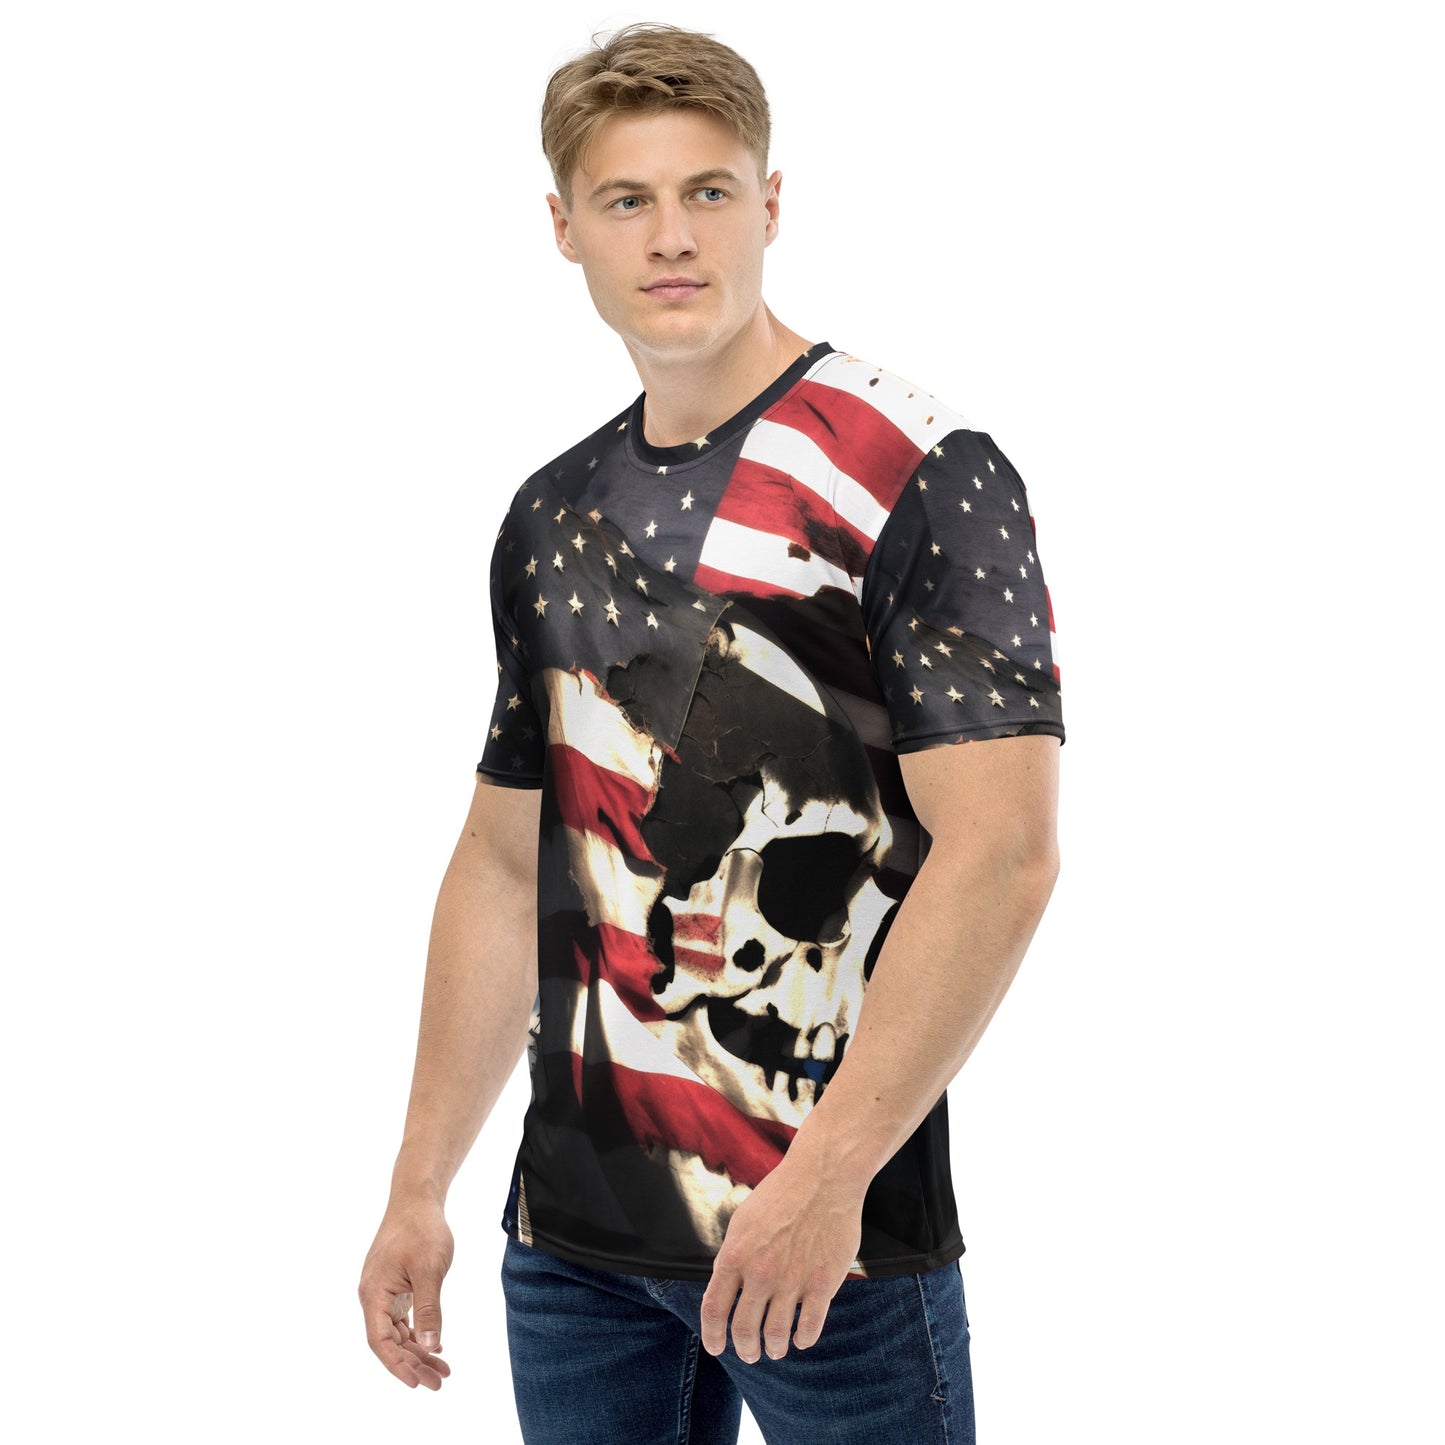 Decayed Democracy Graphic T-shirt